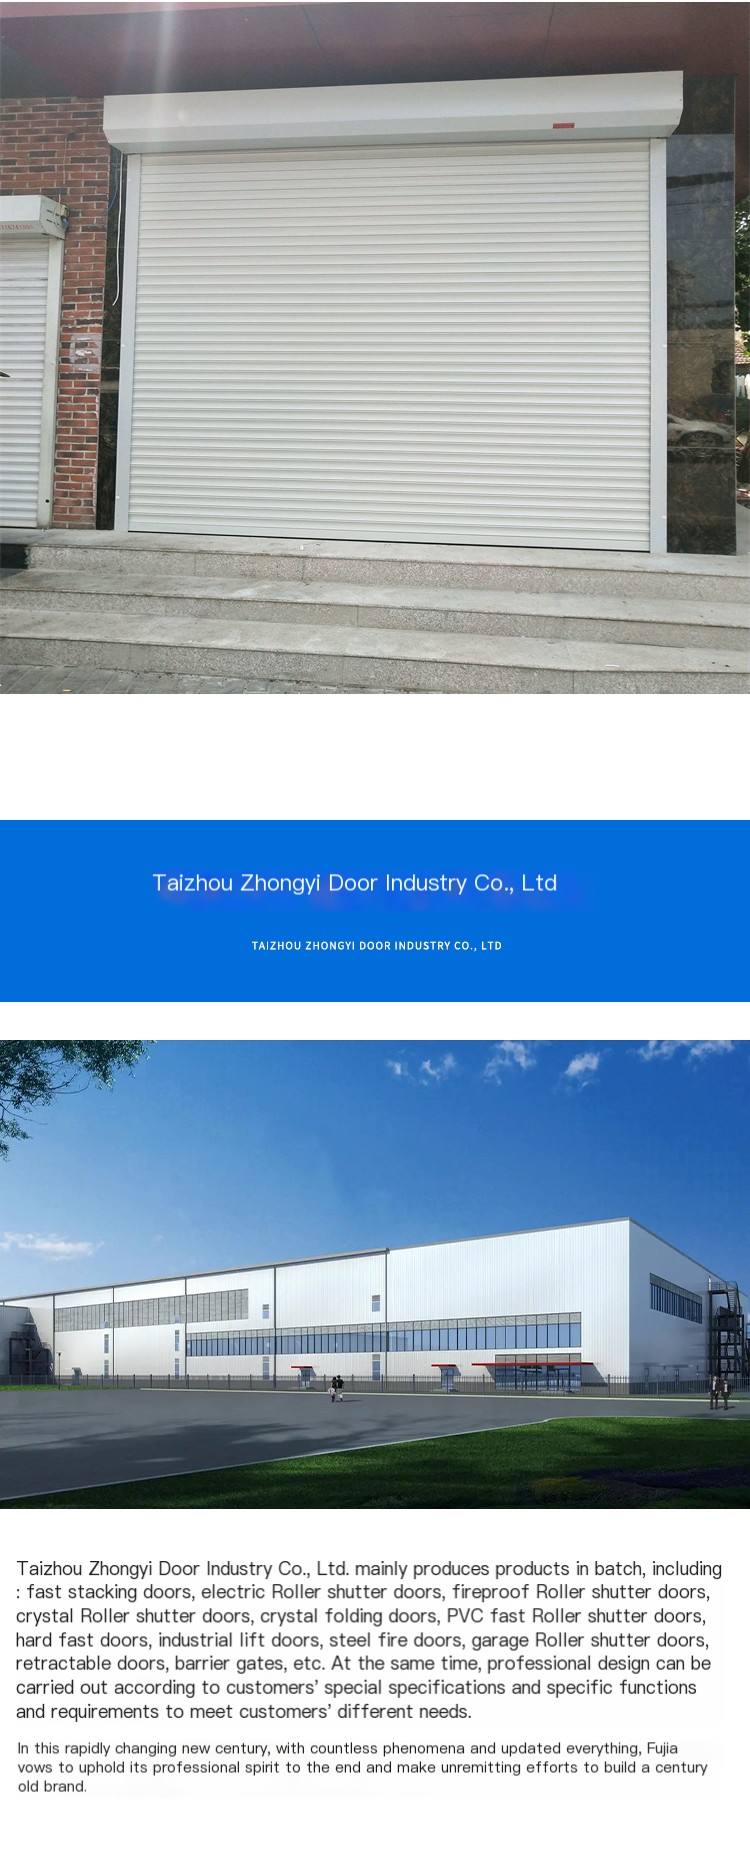 Zhongyi Villa's aluminum alloy roller gate runs smoothly, is durable, and has low noise